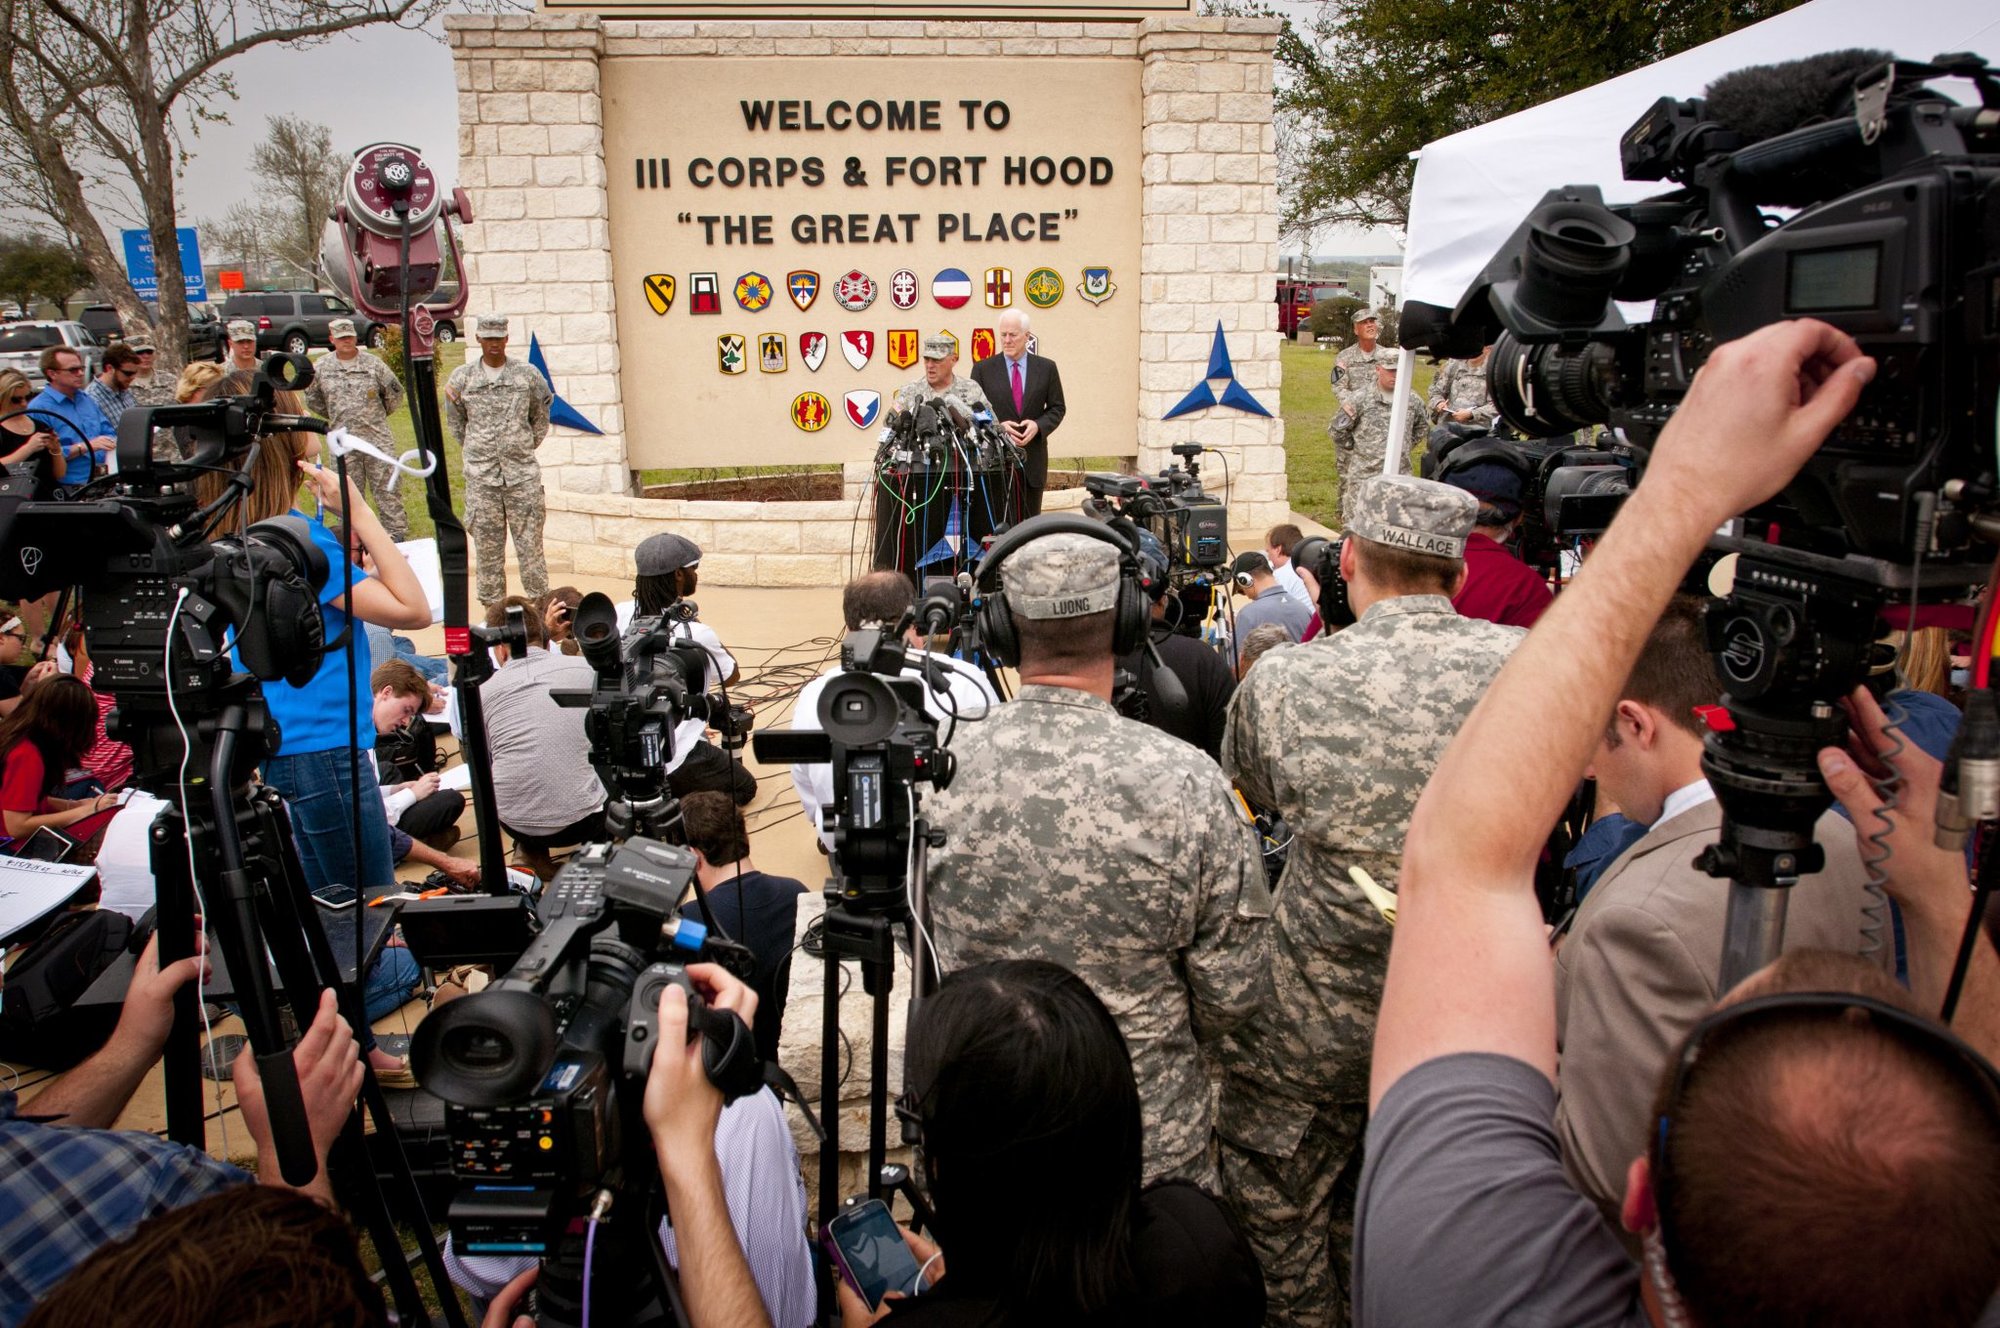 Lt. Gen. Mark Milley, III Corps and Fort Hood commanding general, and U.S. Senator John Cornyn take questions from reporters during a press conference outside the main gate at Fort Hood, Texas April 3. During the press conference, Milley identified the assailant in the April 2 shooting incident on the post as Spc. Ivan A. Lopez, 34, a truck driver with the 49th Transportation Movement Control Battalion, 13th Sustainment Command (Expeditionary). Sixteen people were injured and three killed in the shooting spree. Lopez took his own life following a confrontation with a military police officer. The senator offered condolences as well as his support to the Fort Hood community at the press conference. (U.S. Army photo by Sgt. Ken Scar, 7th Mobile Public Affairs Detachment)